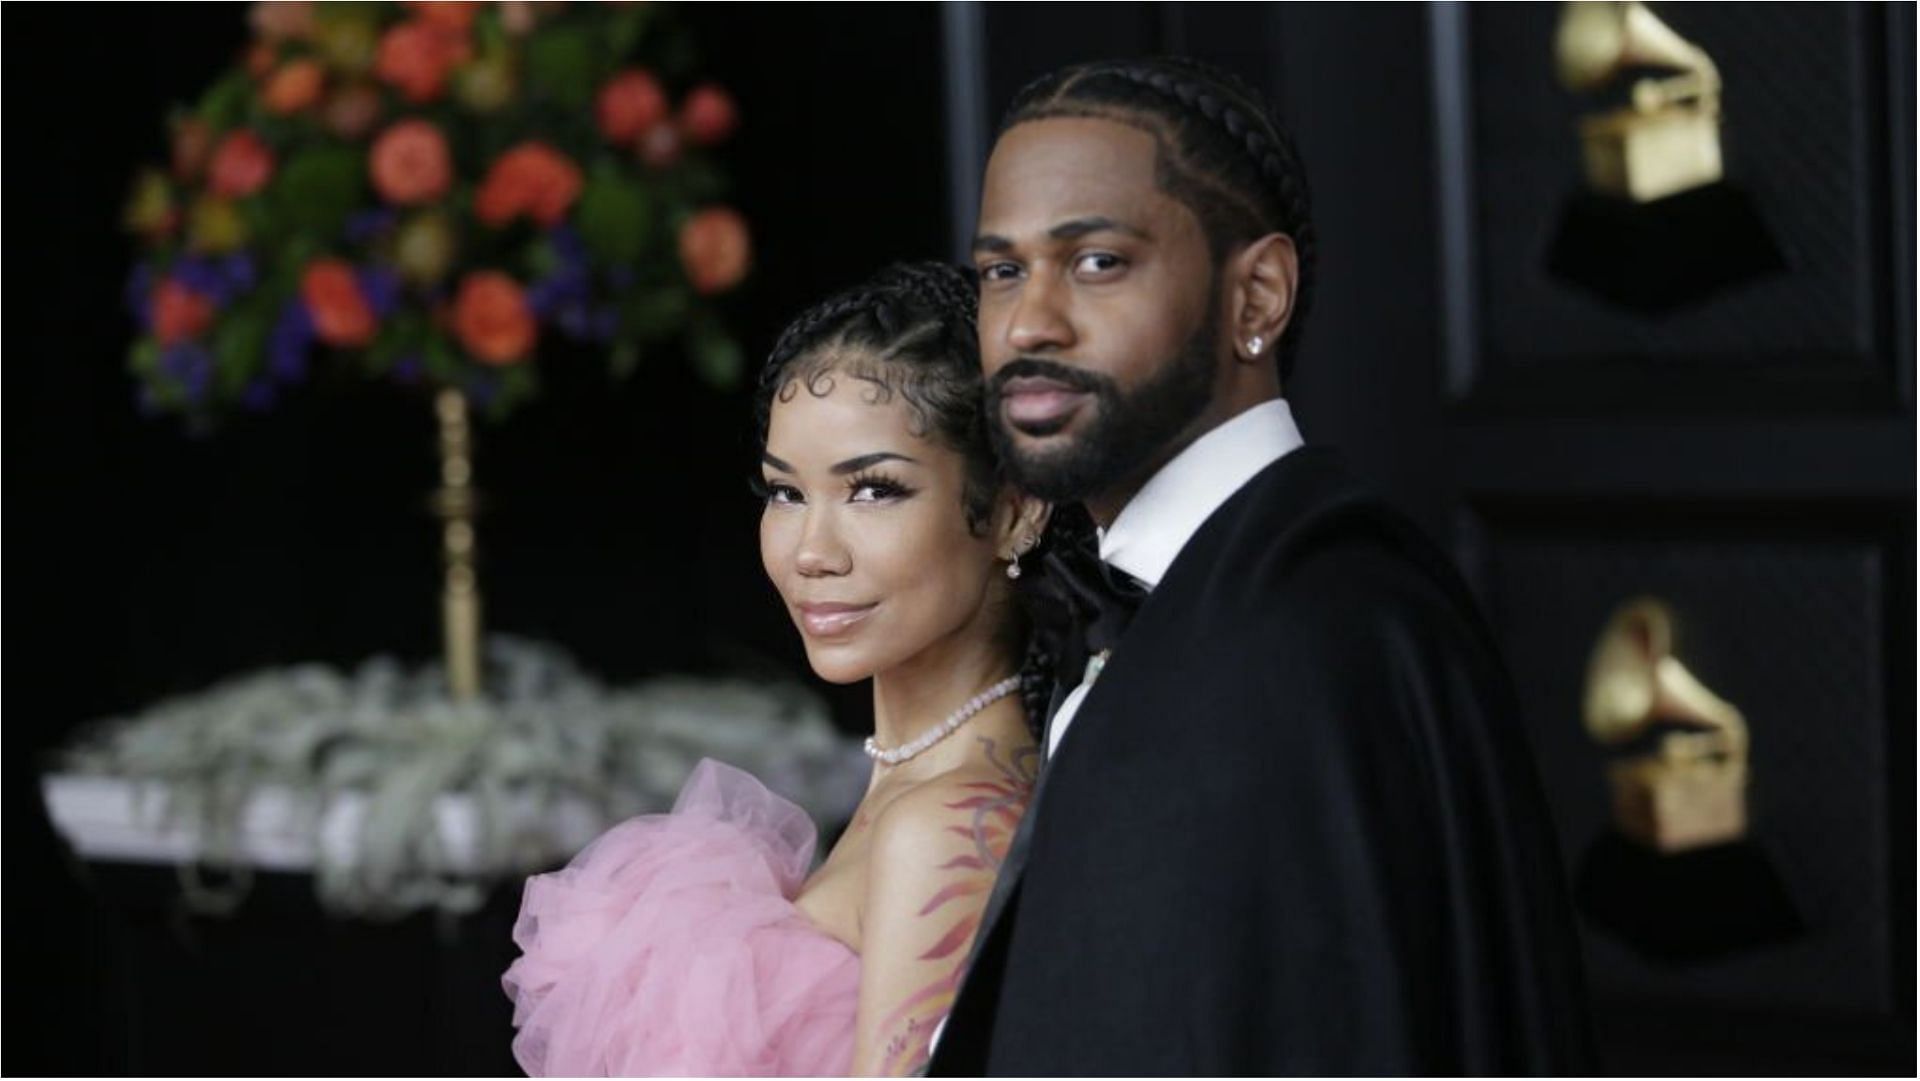 Big Sean and Jhene Aiko recently welcomed a baby boy (Image via Francis Specker/Getty Images)